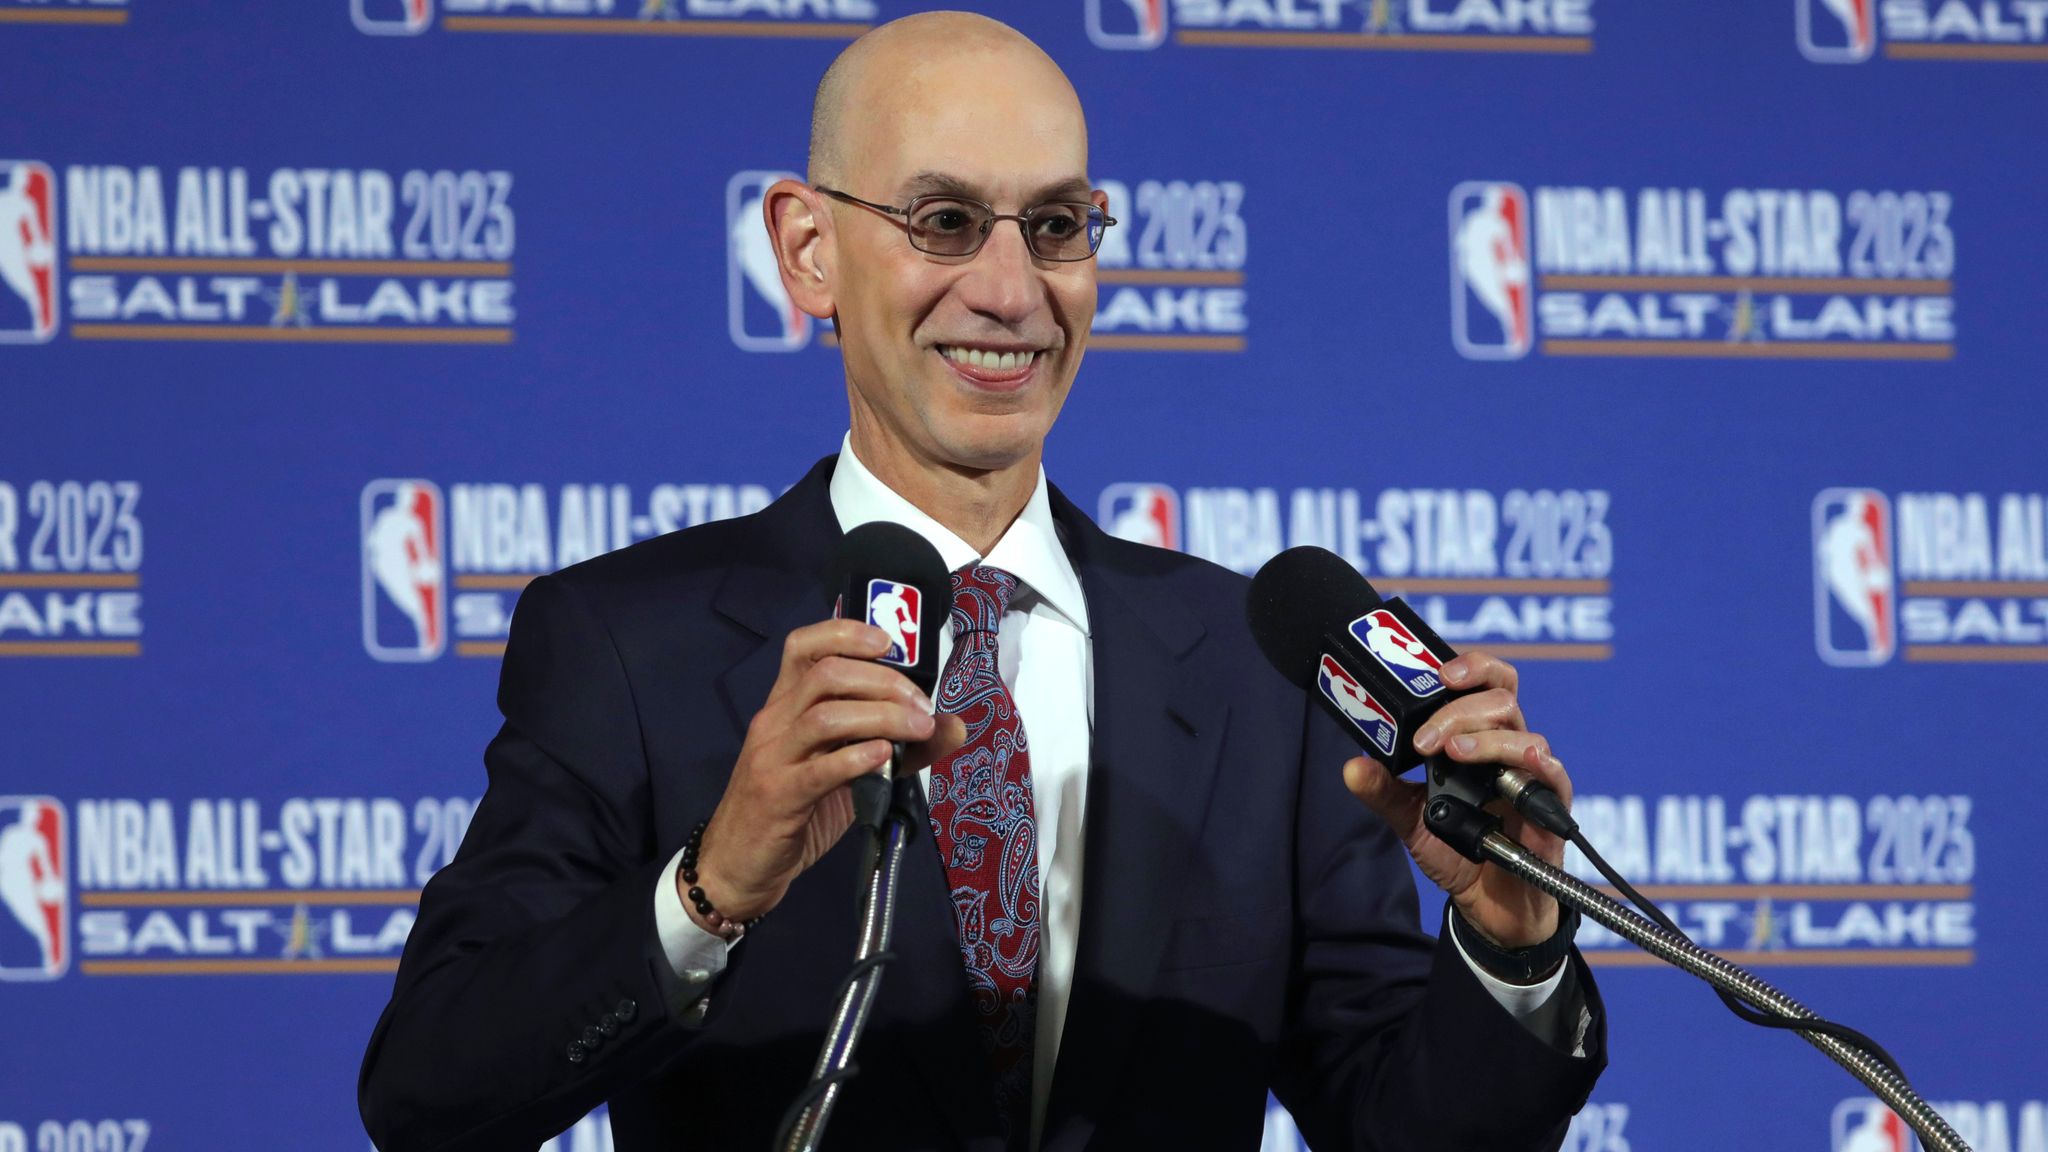 NBA Launches First Store In Africa - Ministry of Sport